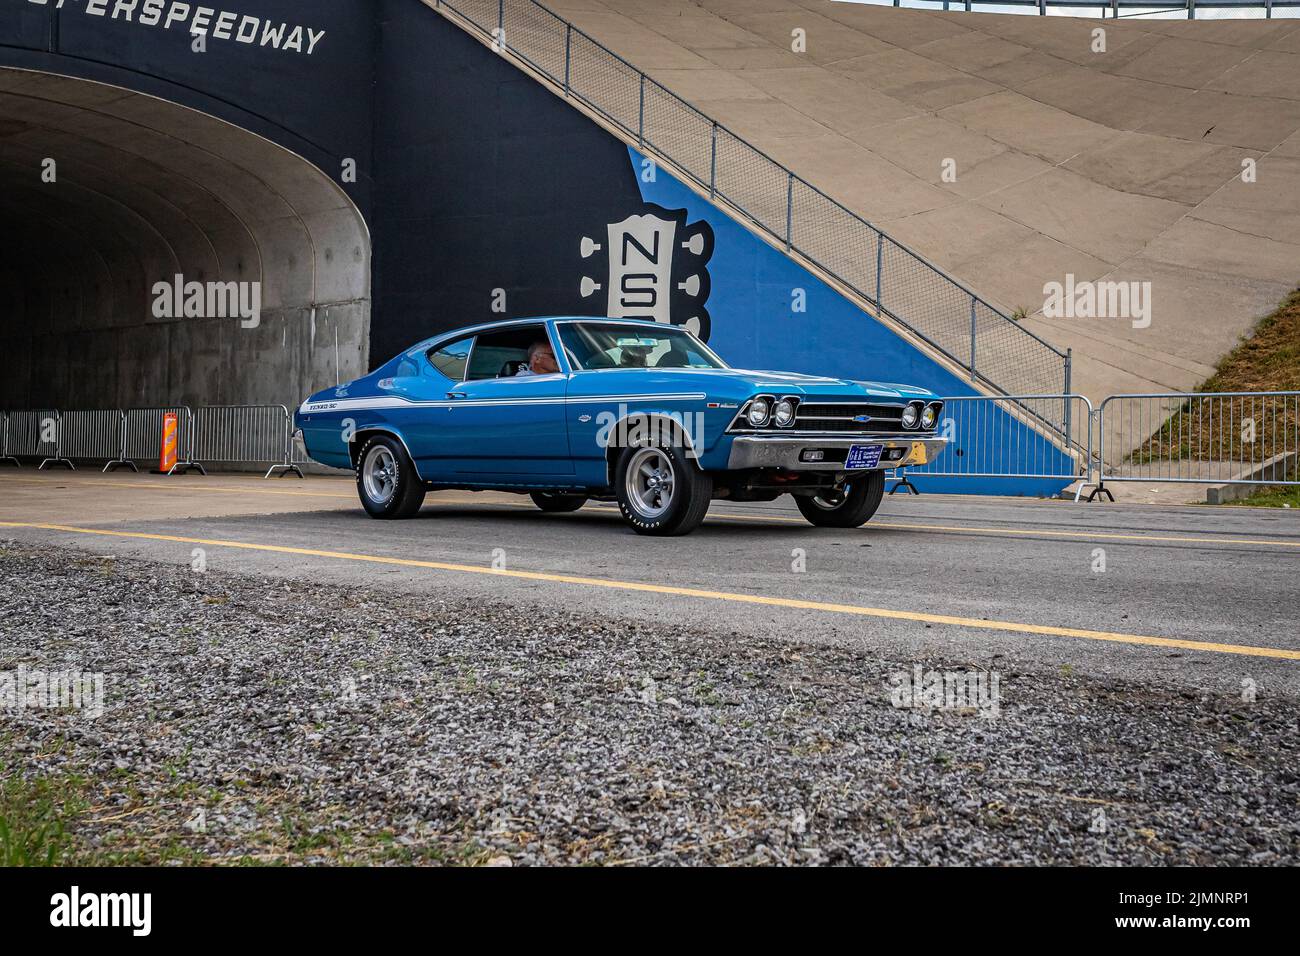 Lebanon, TN - May 14, 2022: Wide angle front corner view of a 1969 Chevrolet Yenko Chevelle Hardtop Coupe driving on a road leaving a local car show. Stock Photo